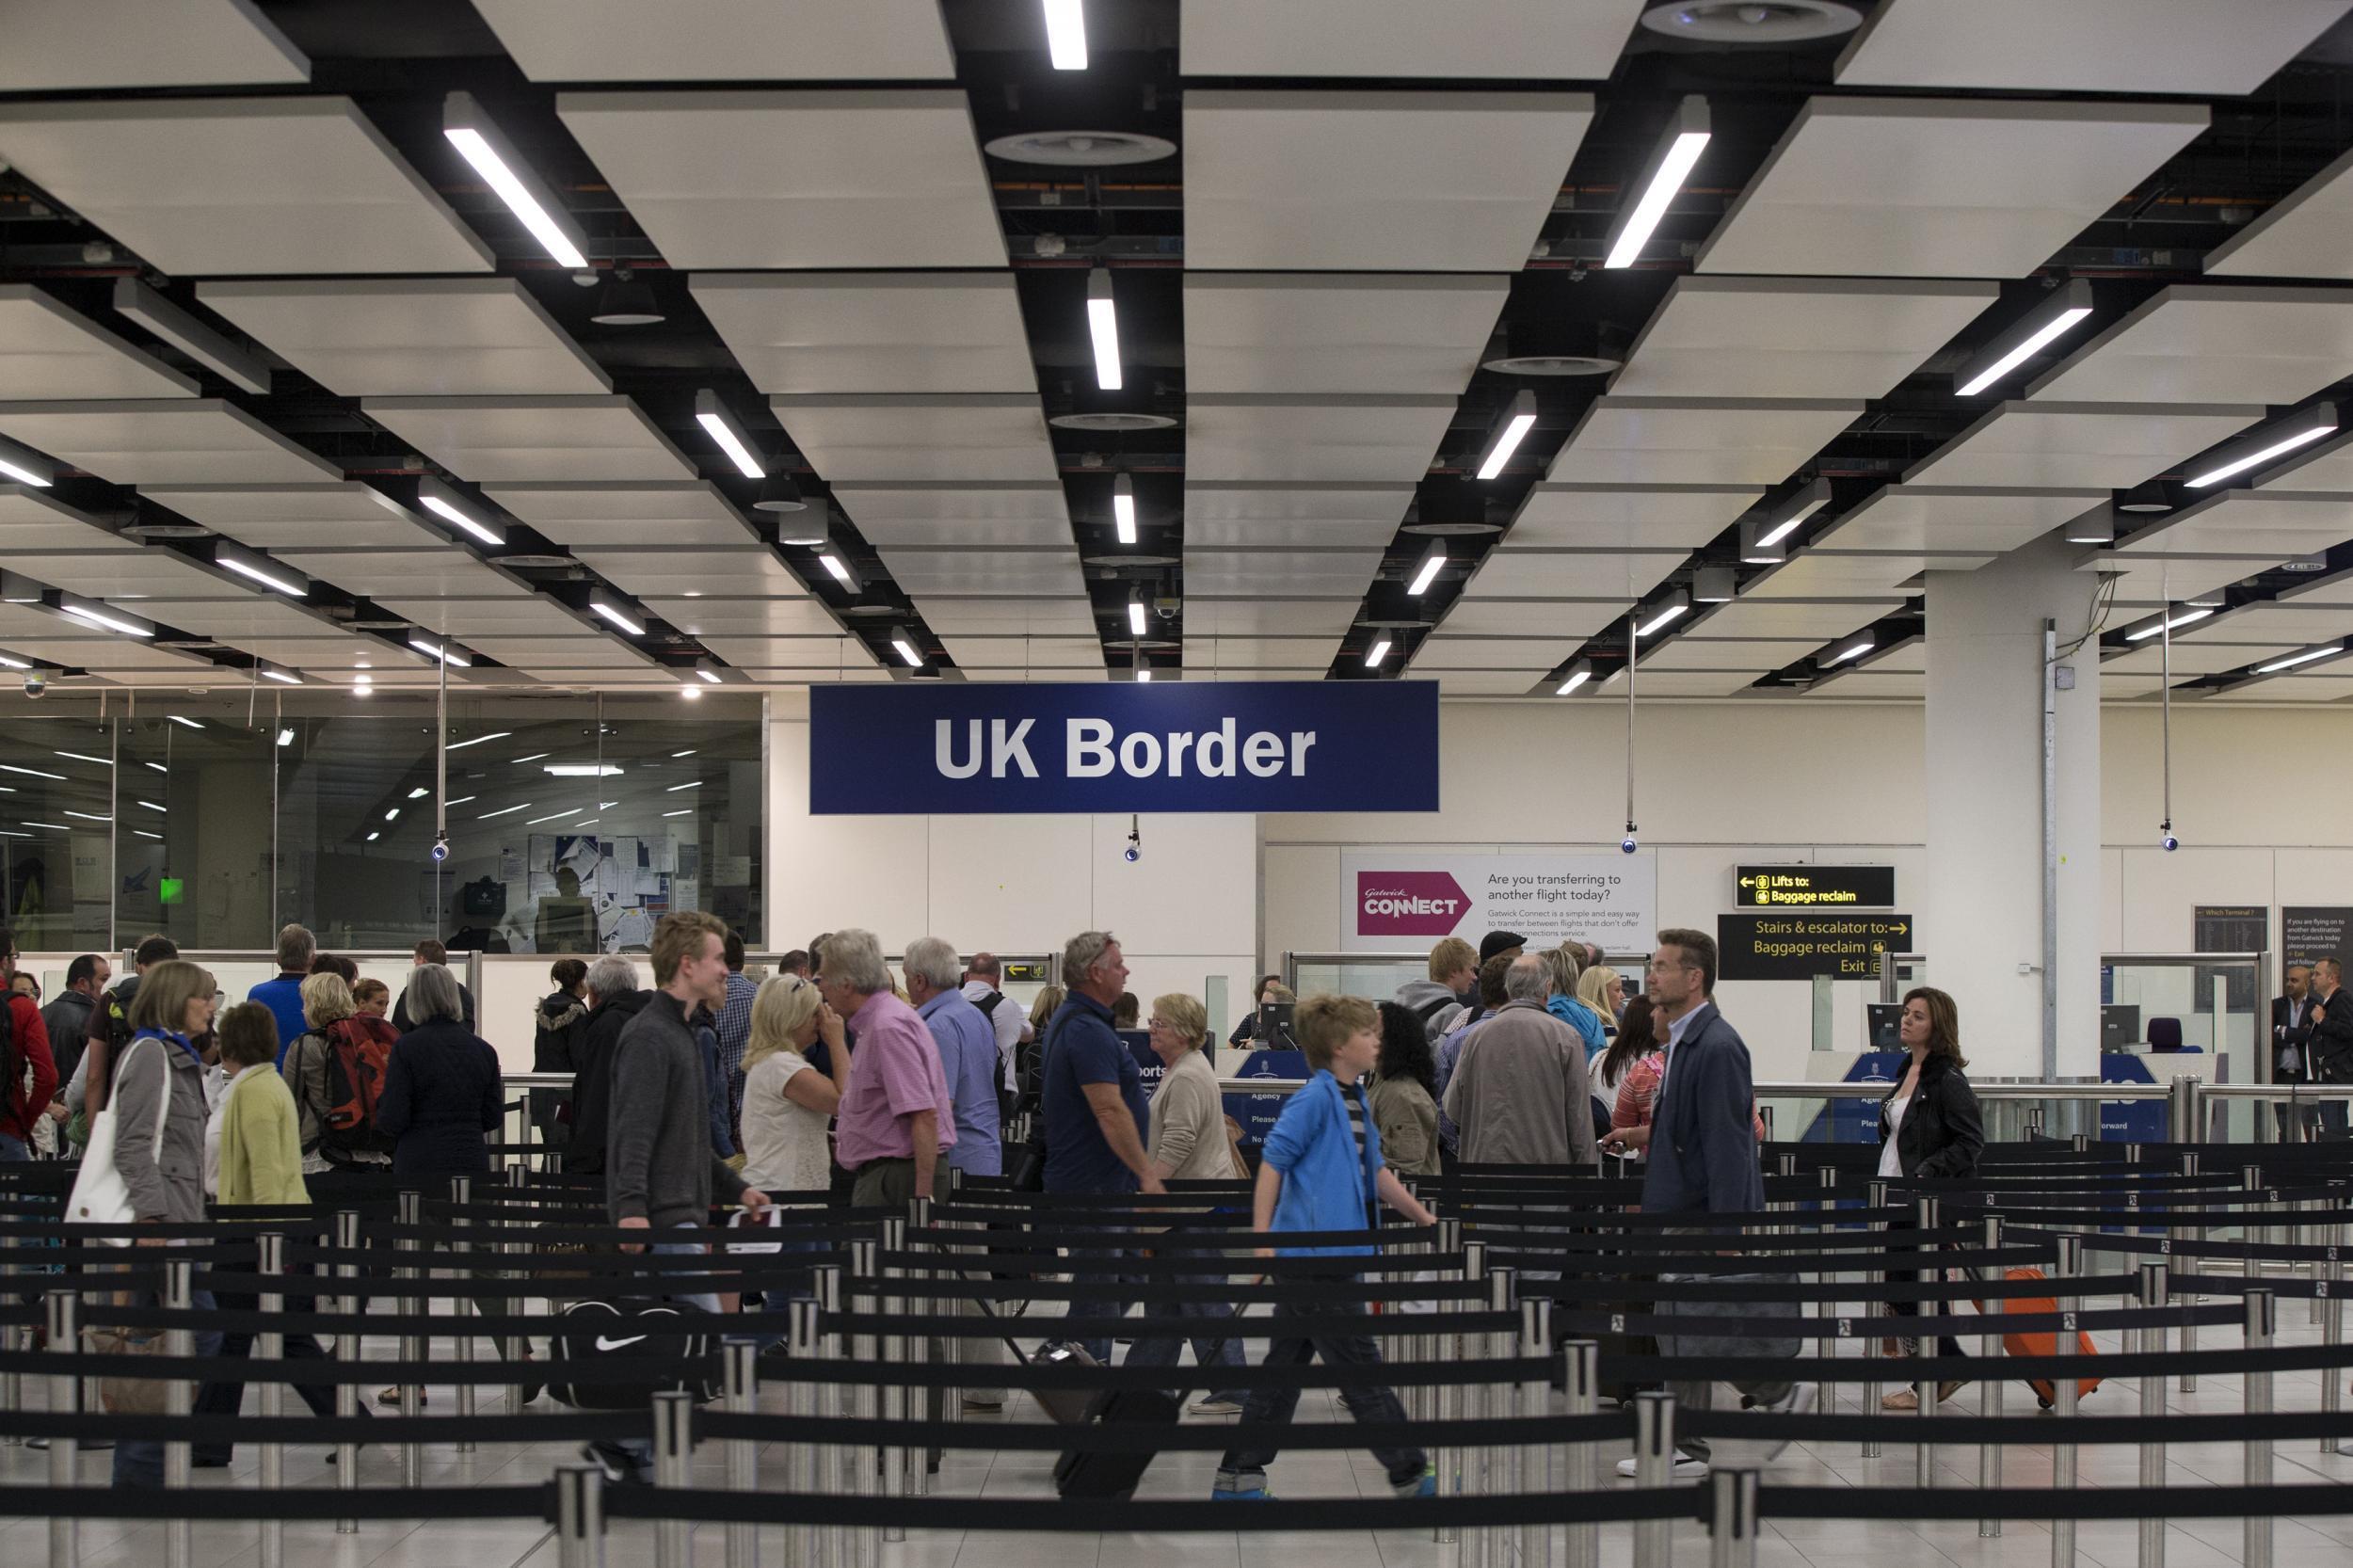 Britons want &apos;smarter border control without blanket caps on migrants&apos;